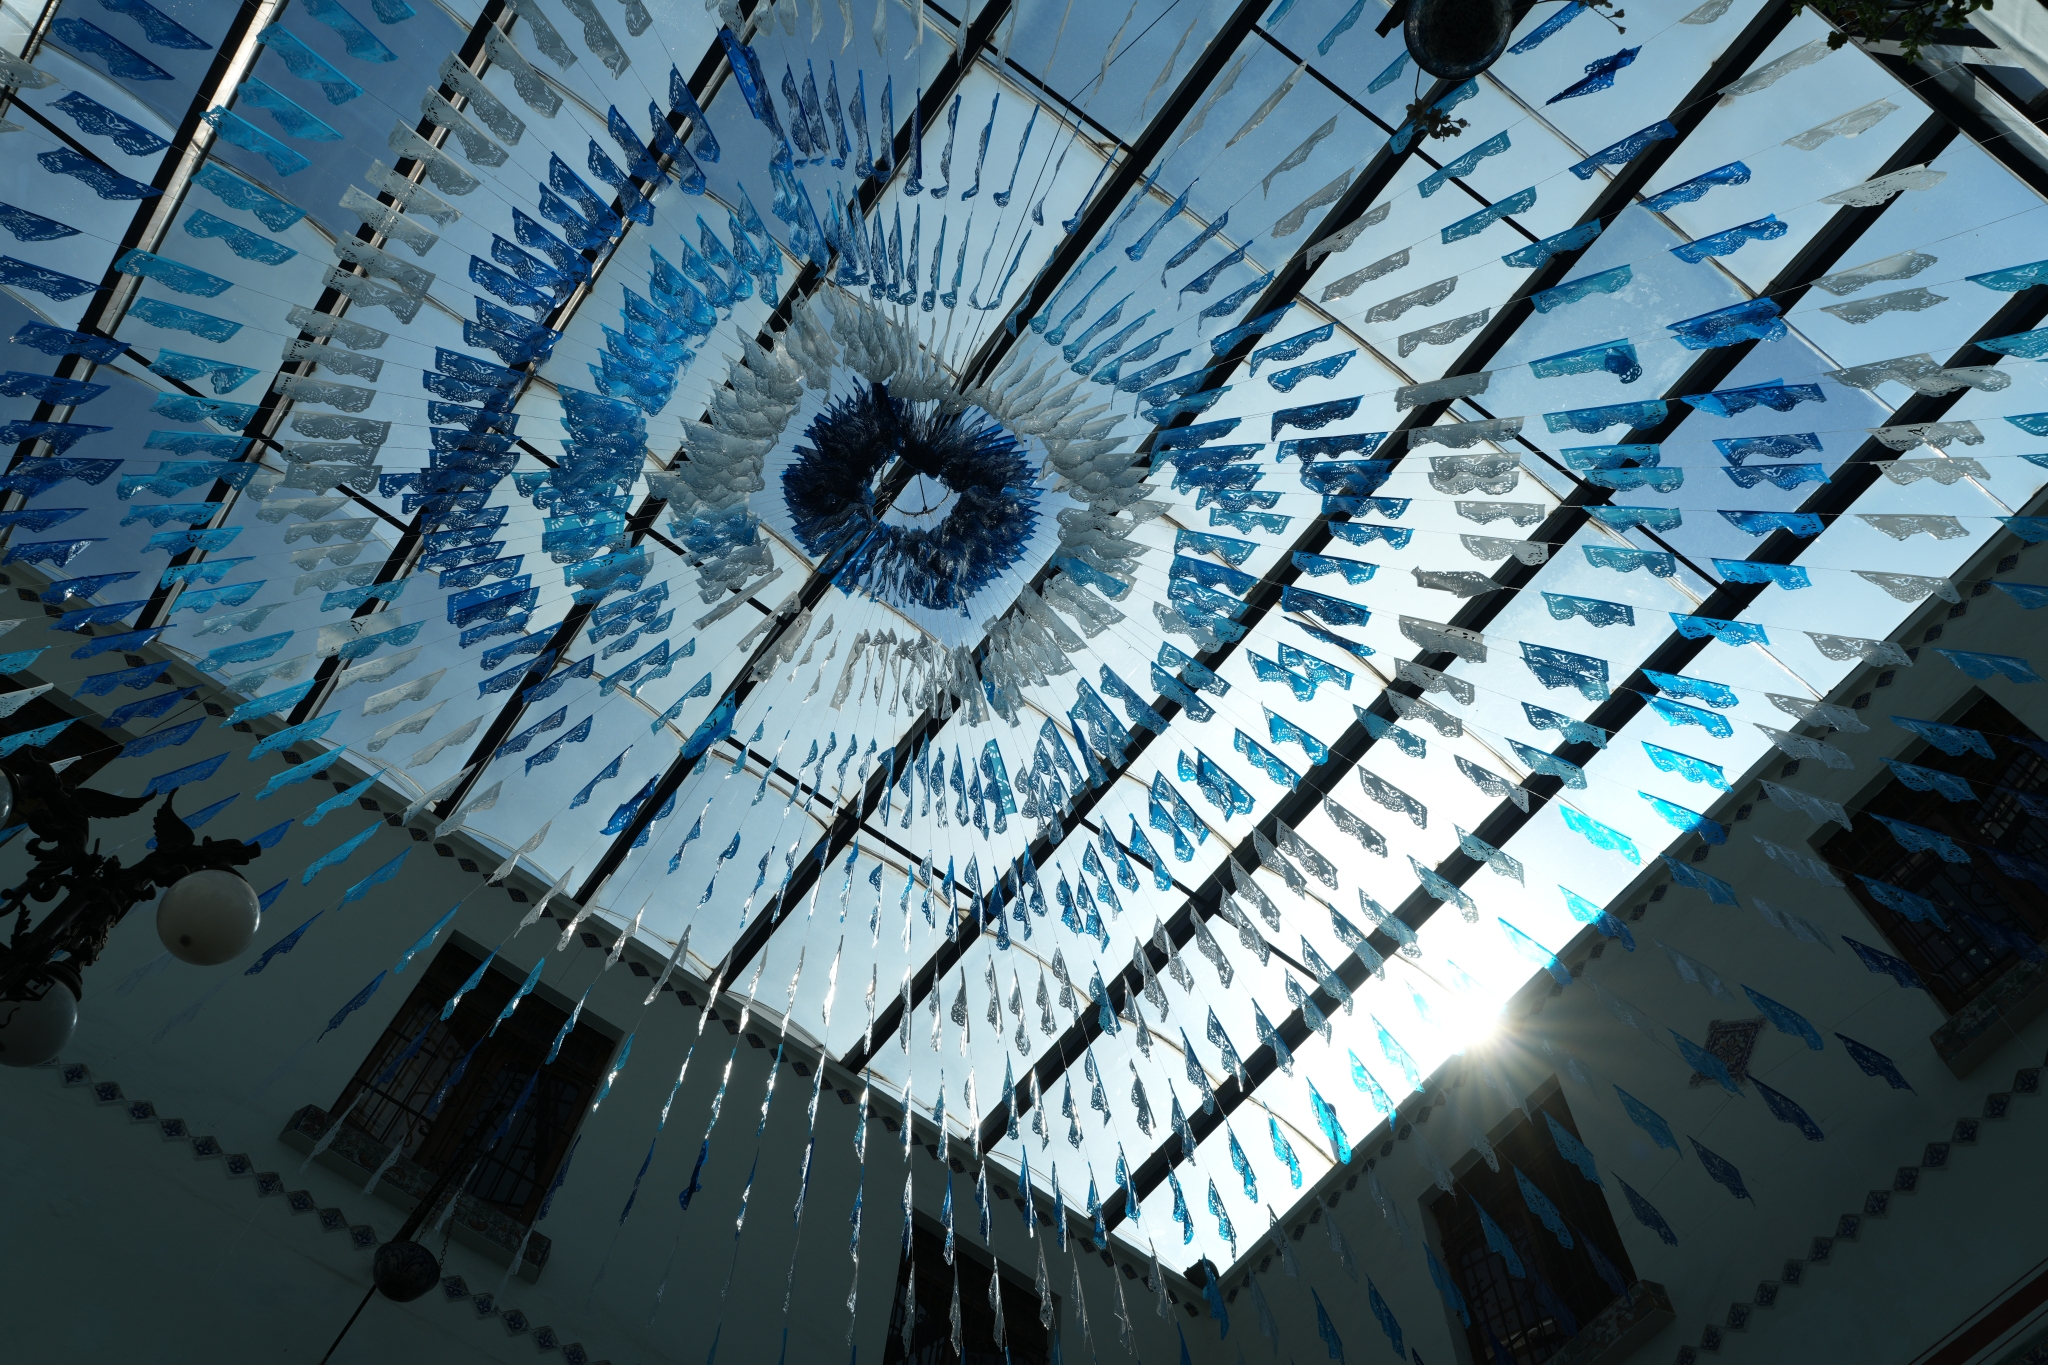 A square glass ceiling decorated with semi-translucent flags, illuminated by the sun